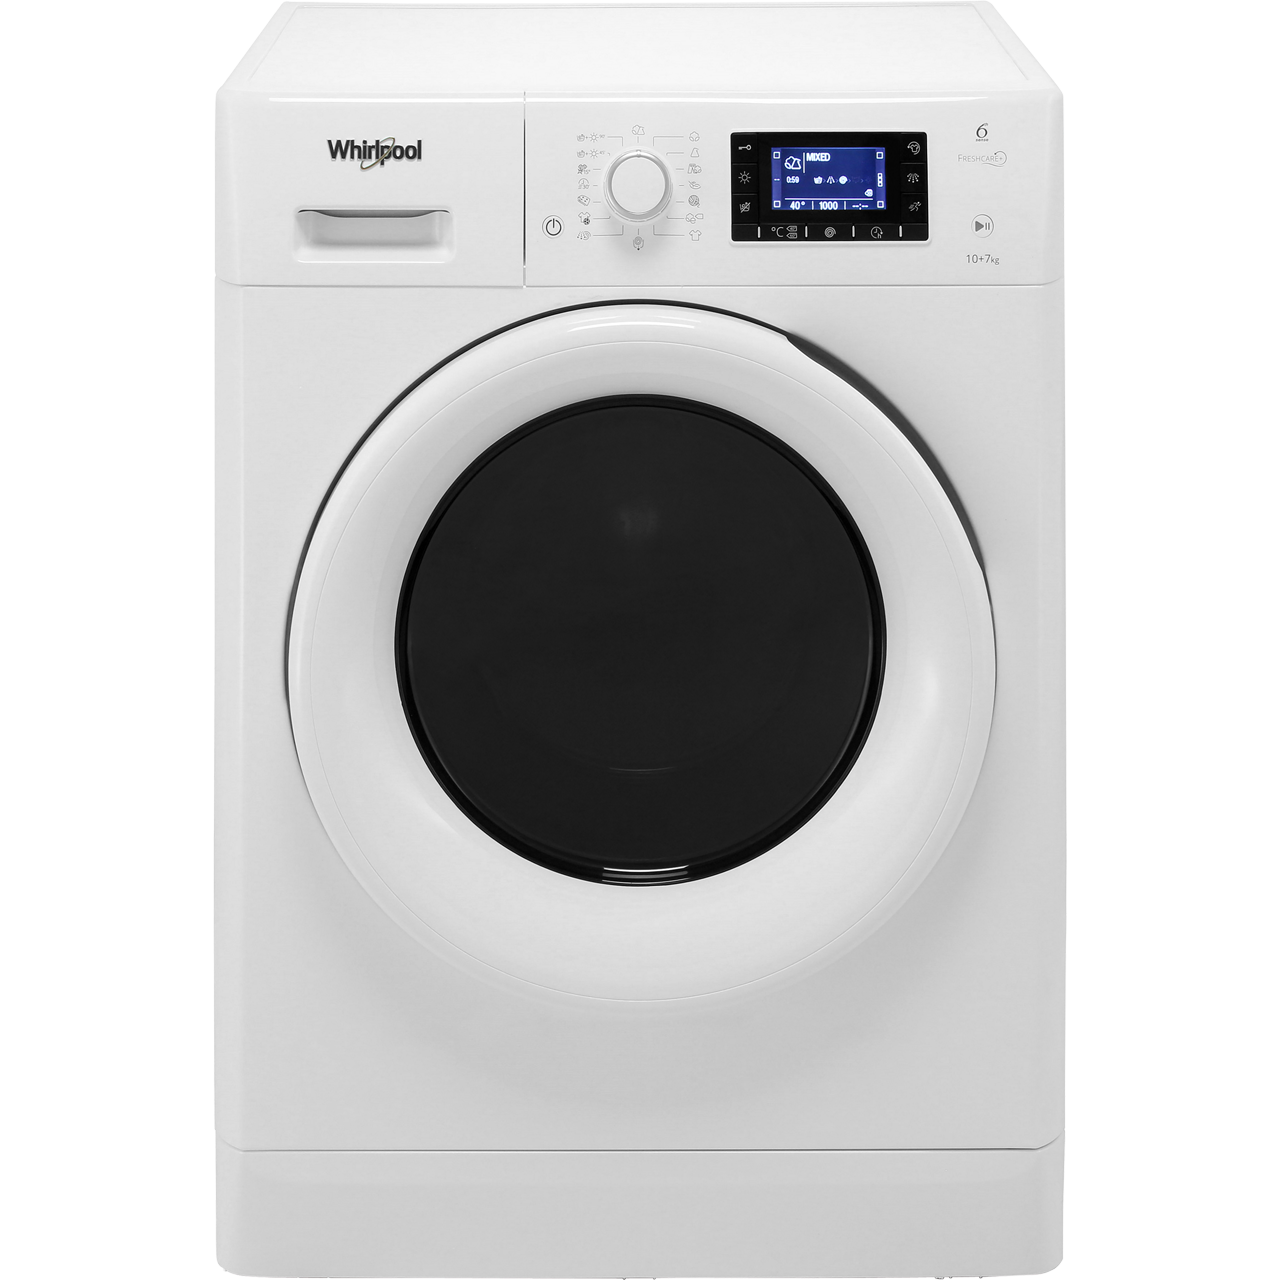 Whirlpool FWDD1071681W 10Kg / 7Kg Washer Dryer with 1600 rpm Review